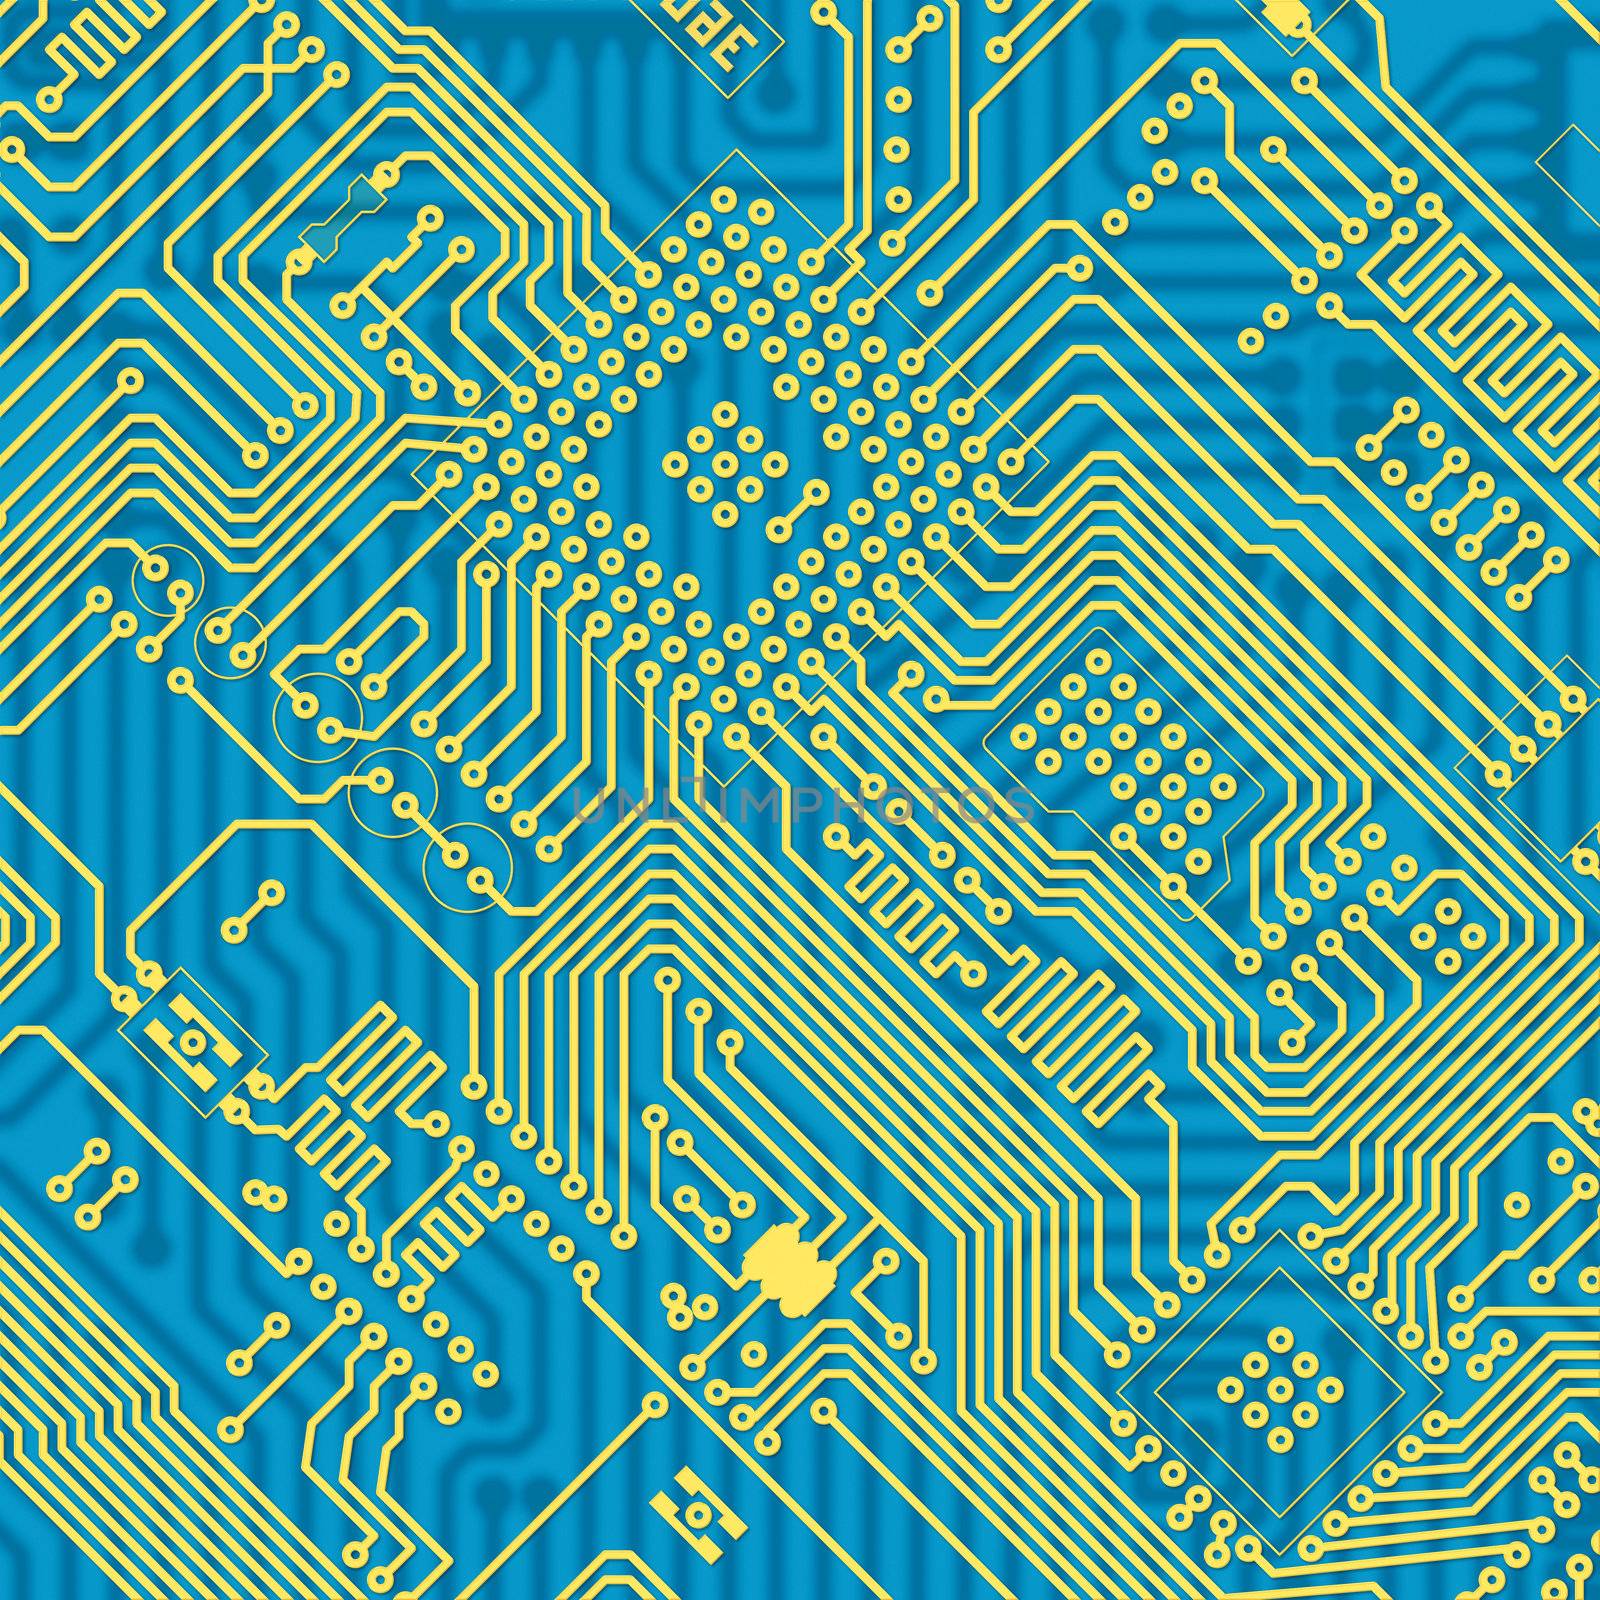 Printed blue industrial circuit board texture by pzaxe